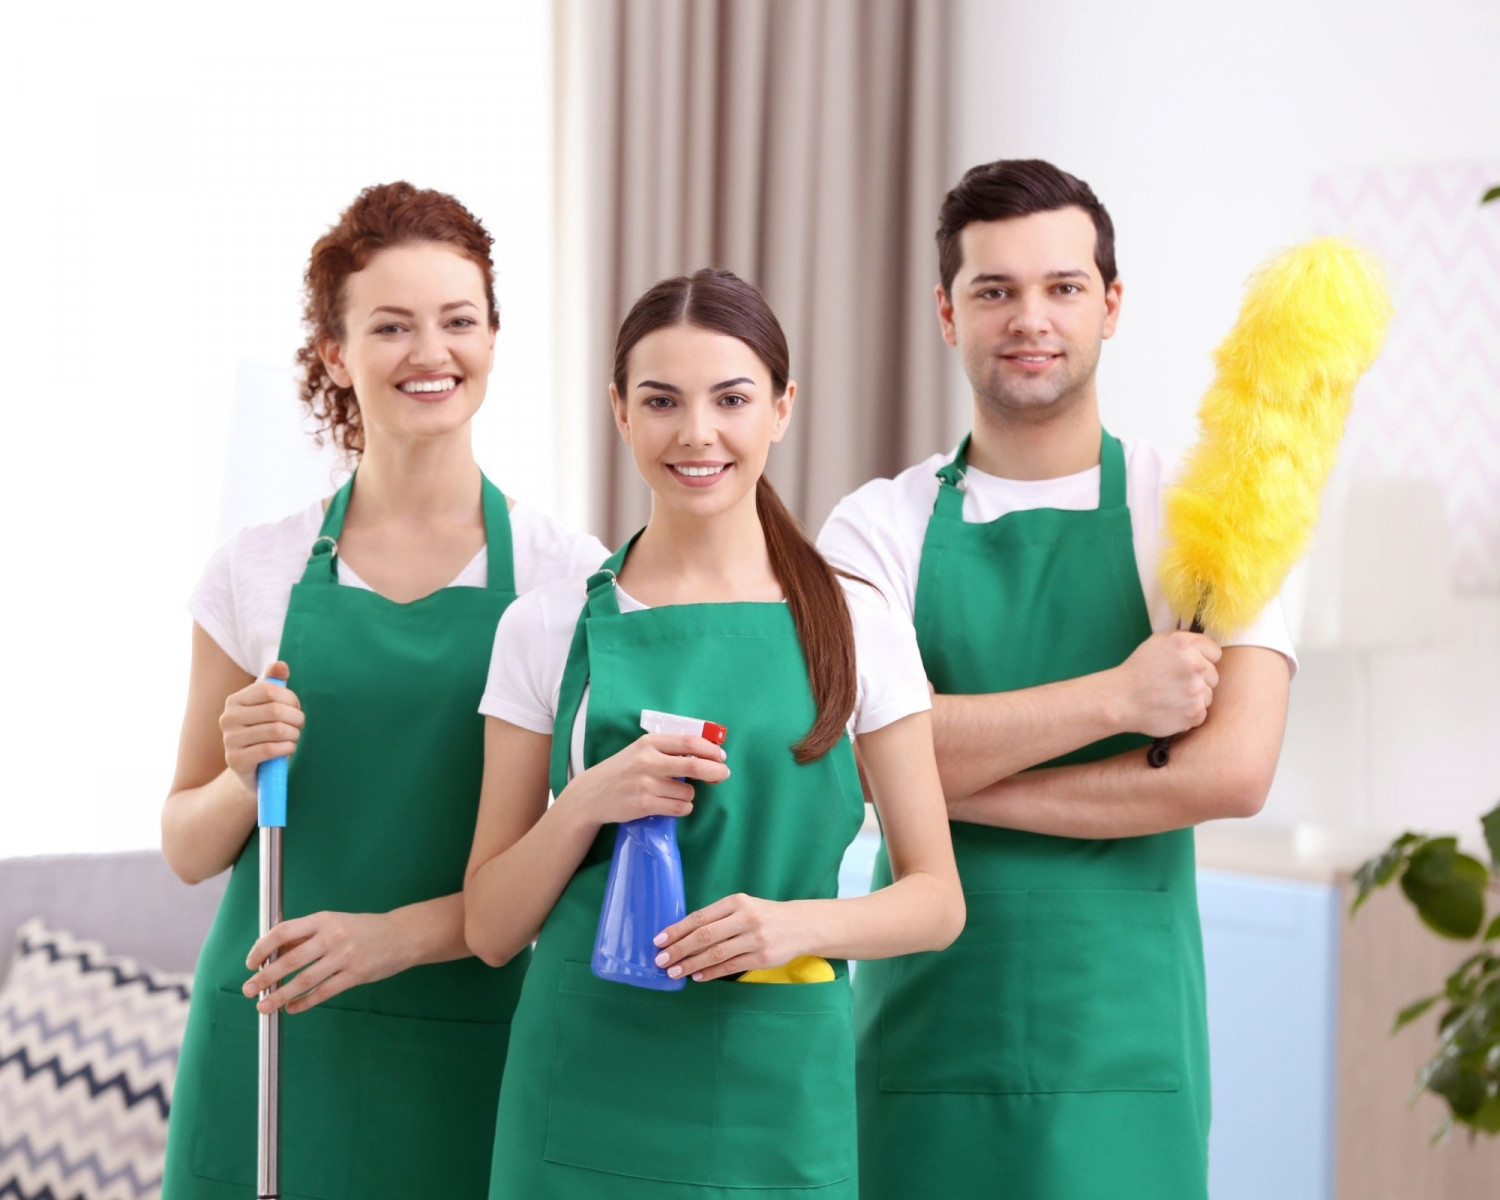 Stock photo of 2 women and a man with cleaning equipment